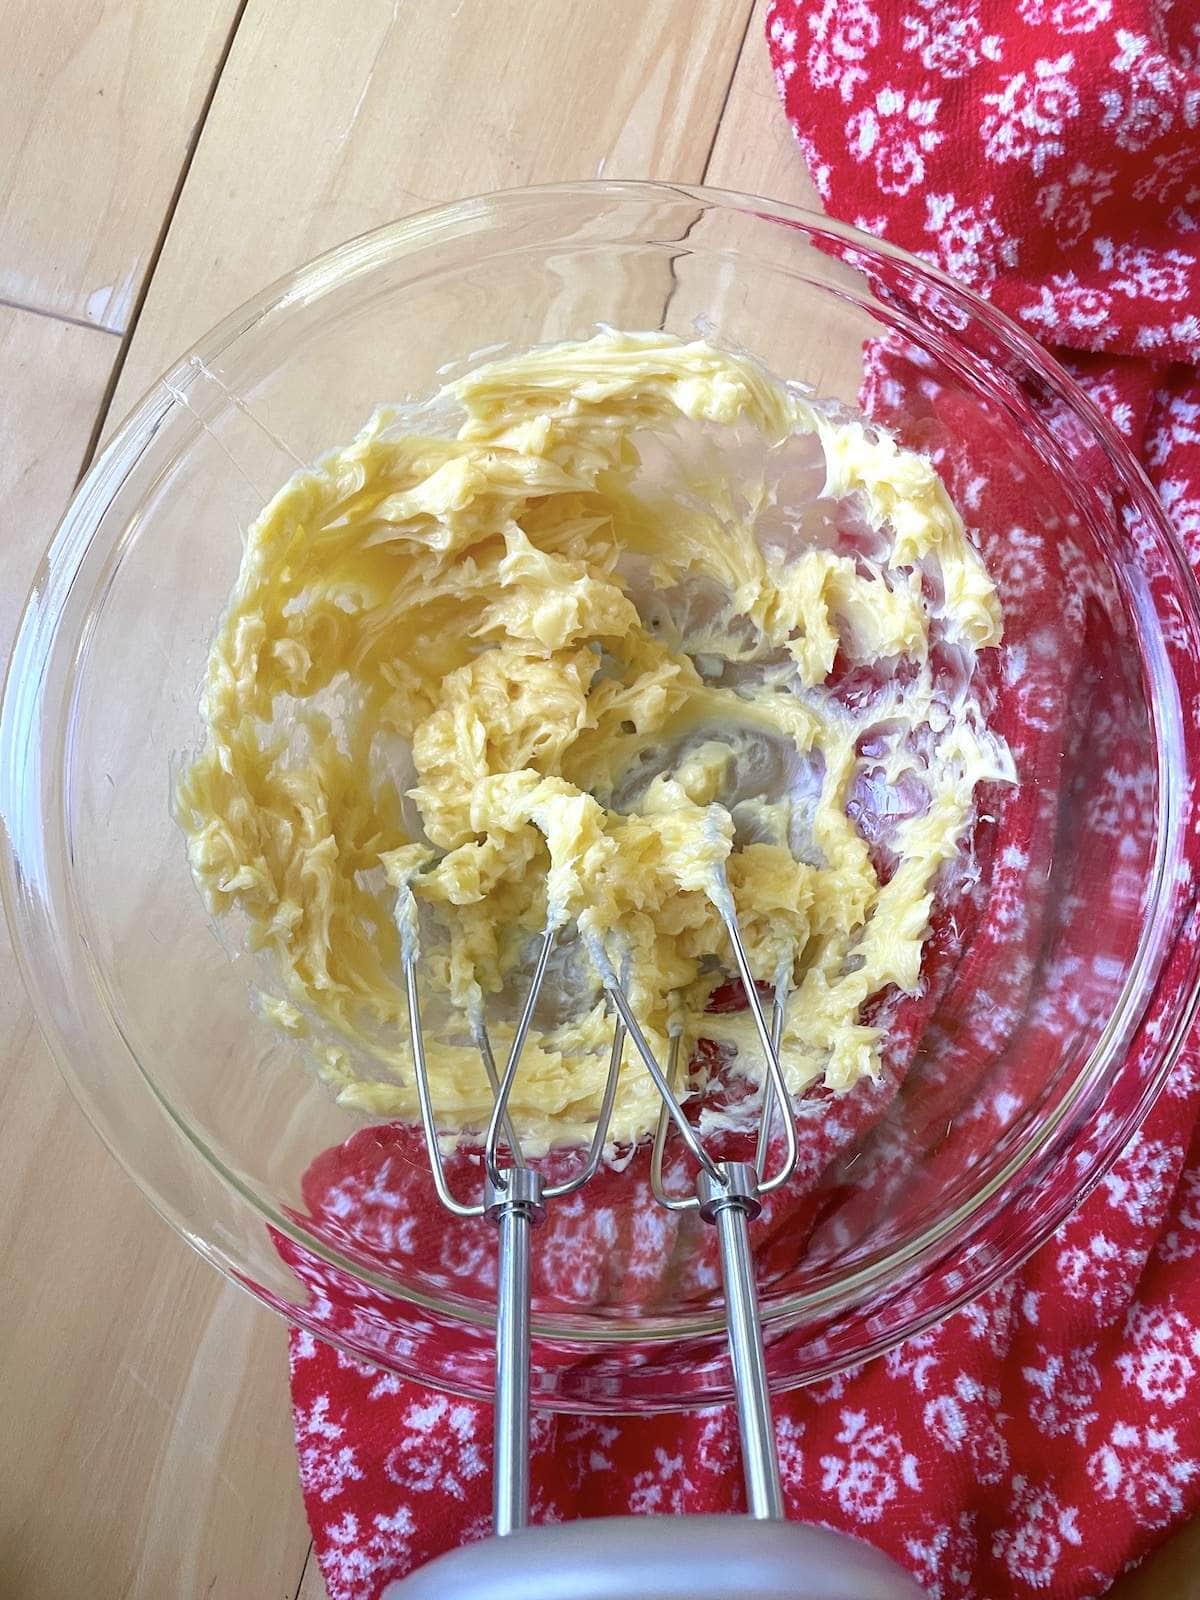 Honey butter in a mixing bowl after being whipped with a hand mixer.